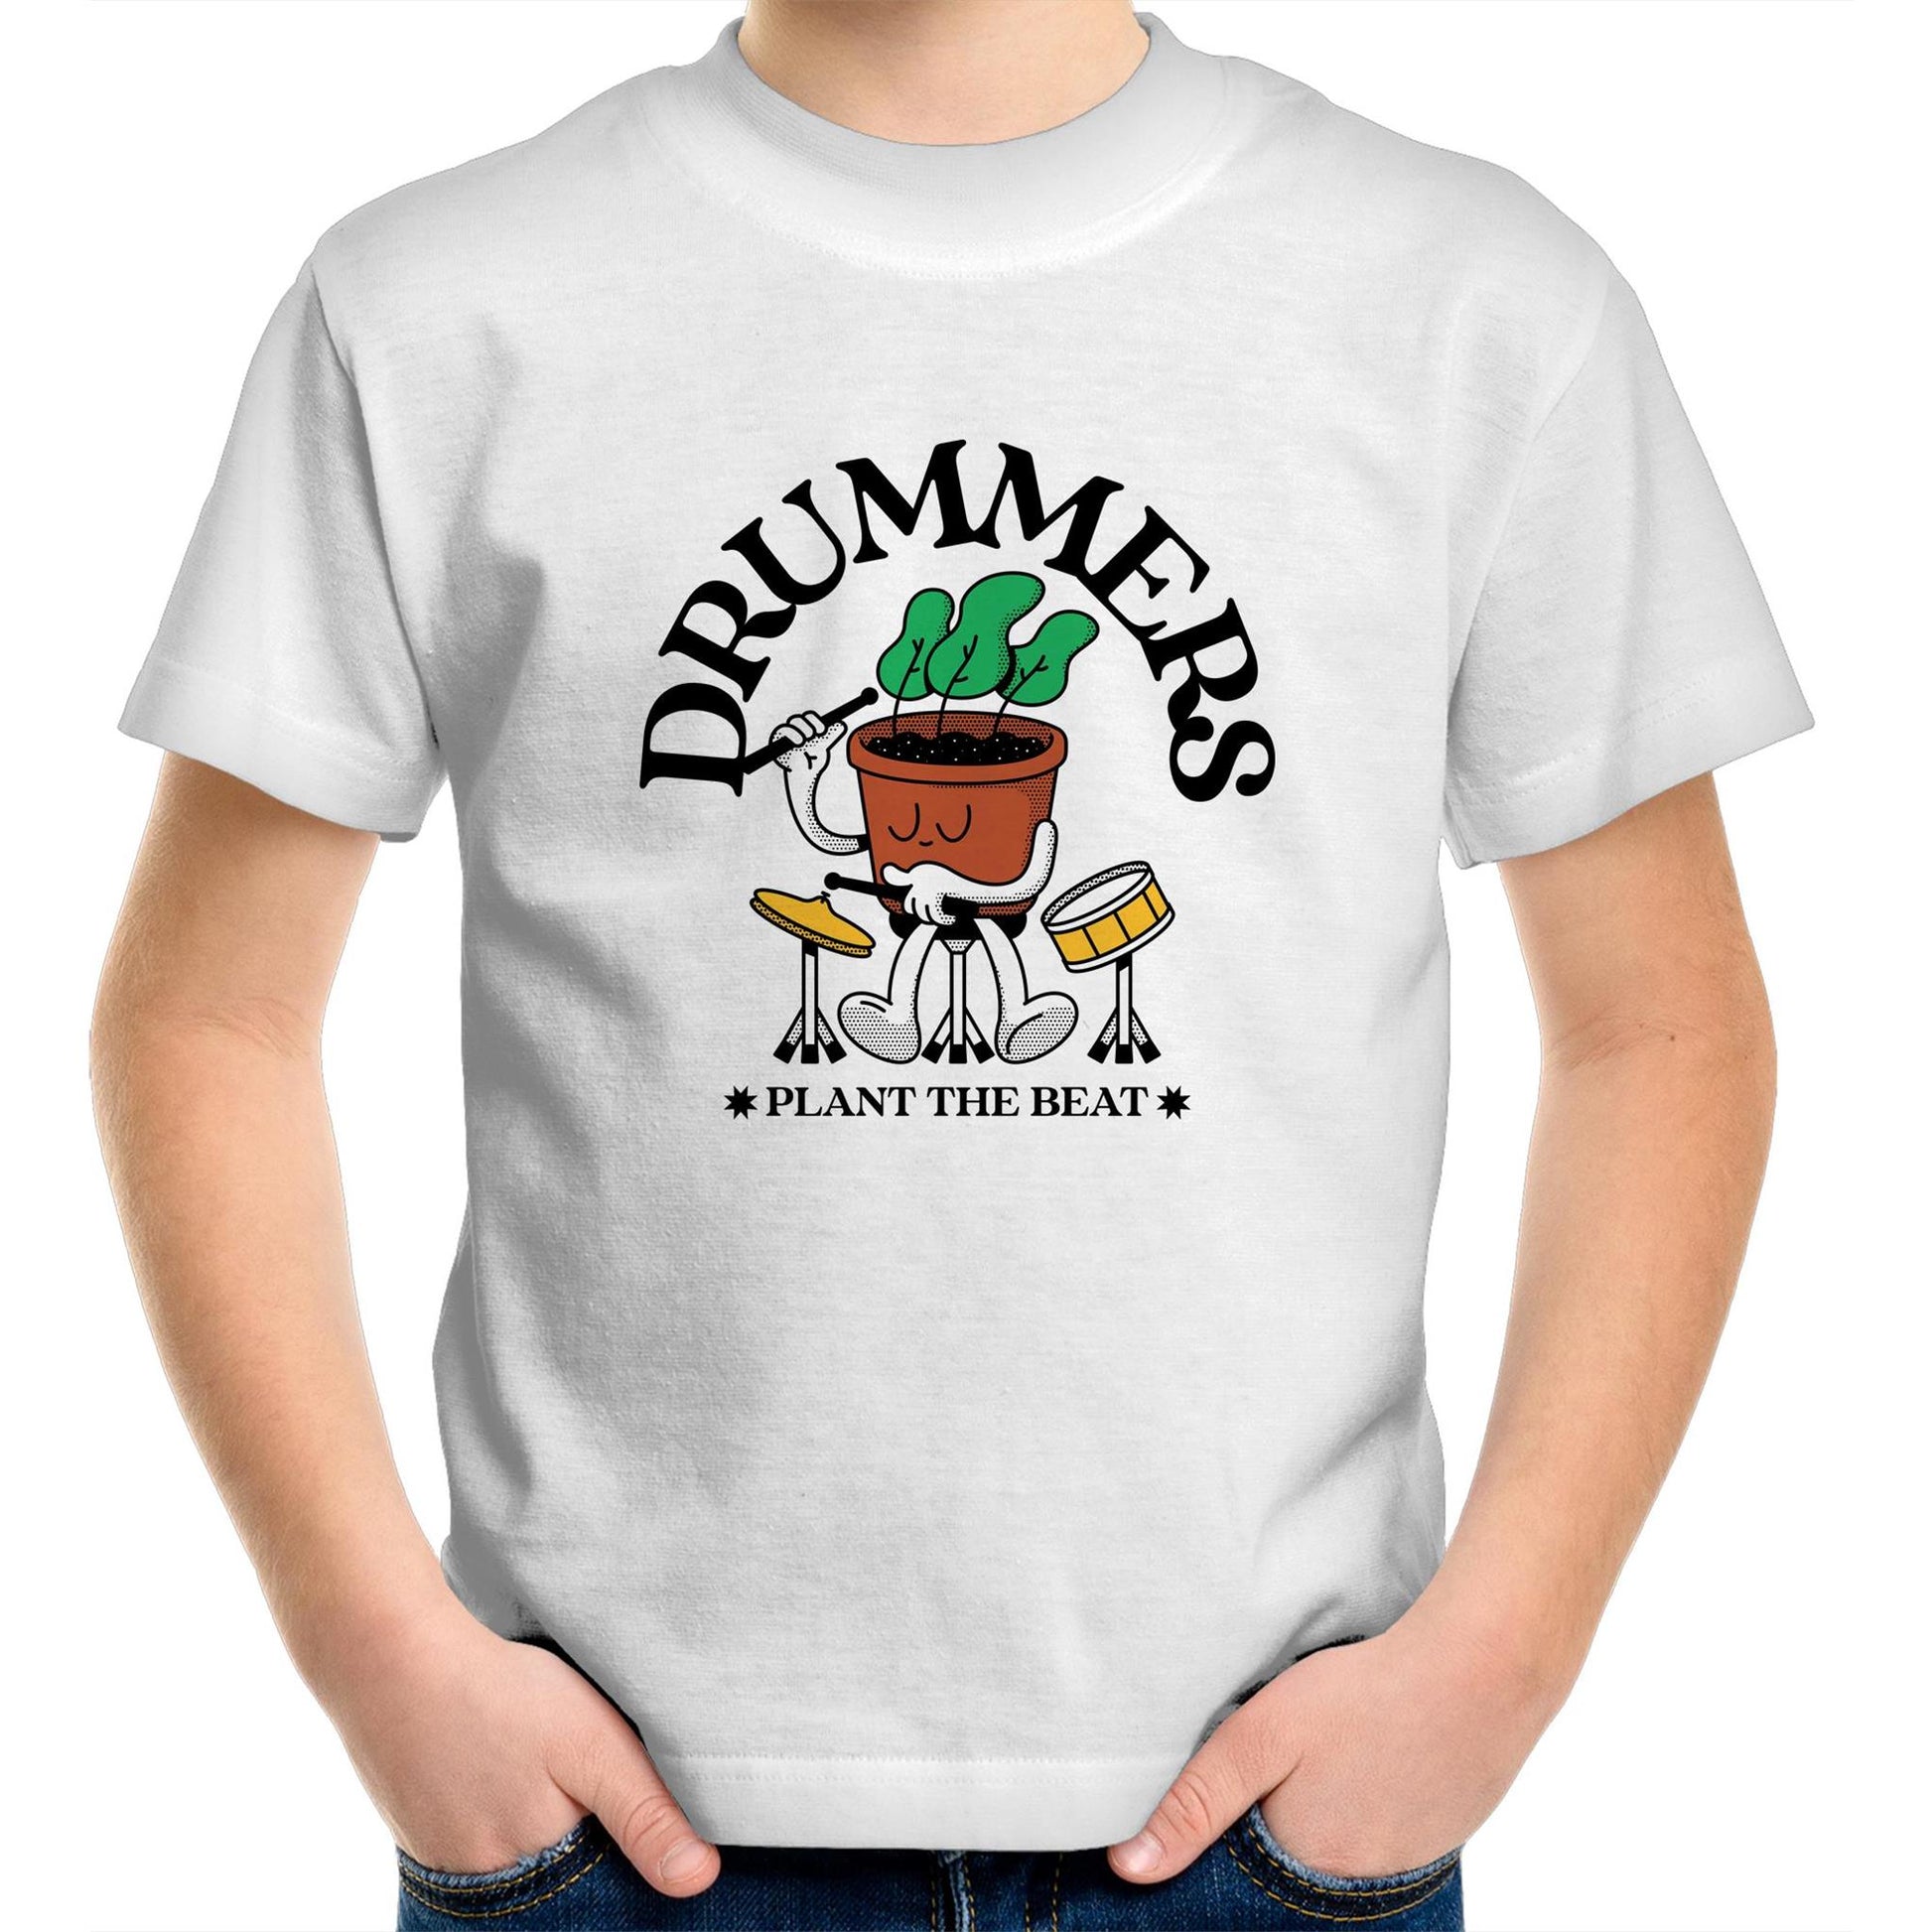 Drummers - Kids Youth Crew T-Shirt White Kids Youth T-shirt Music Plants